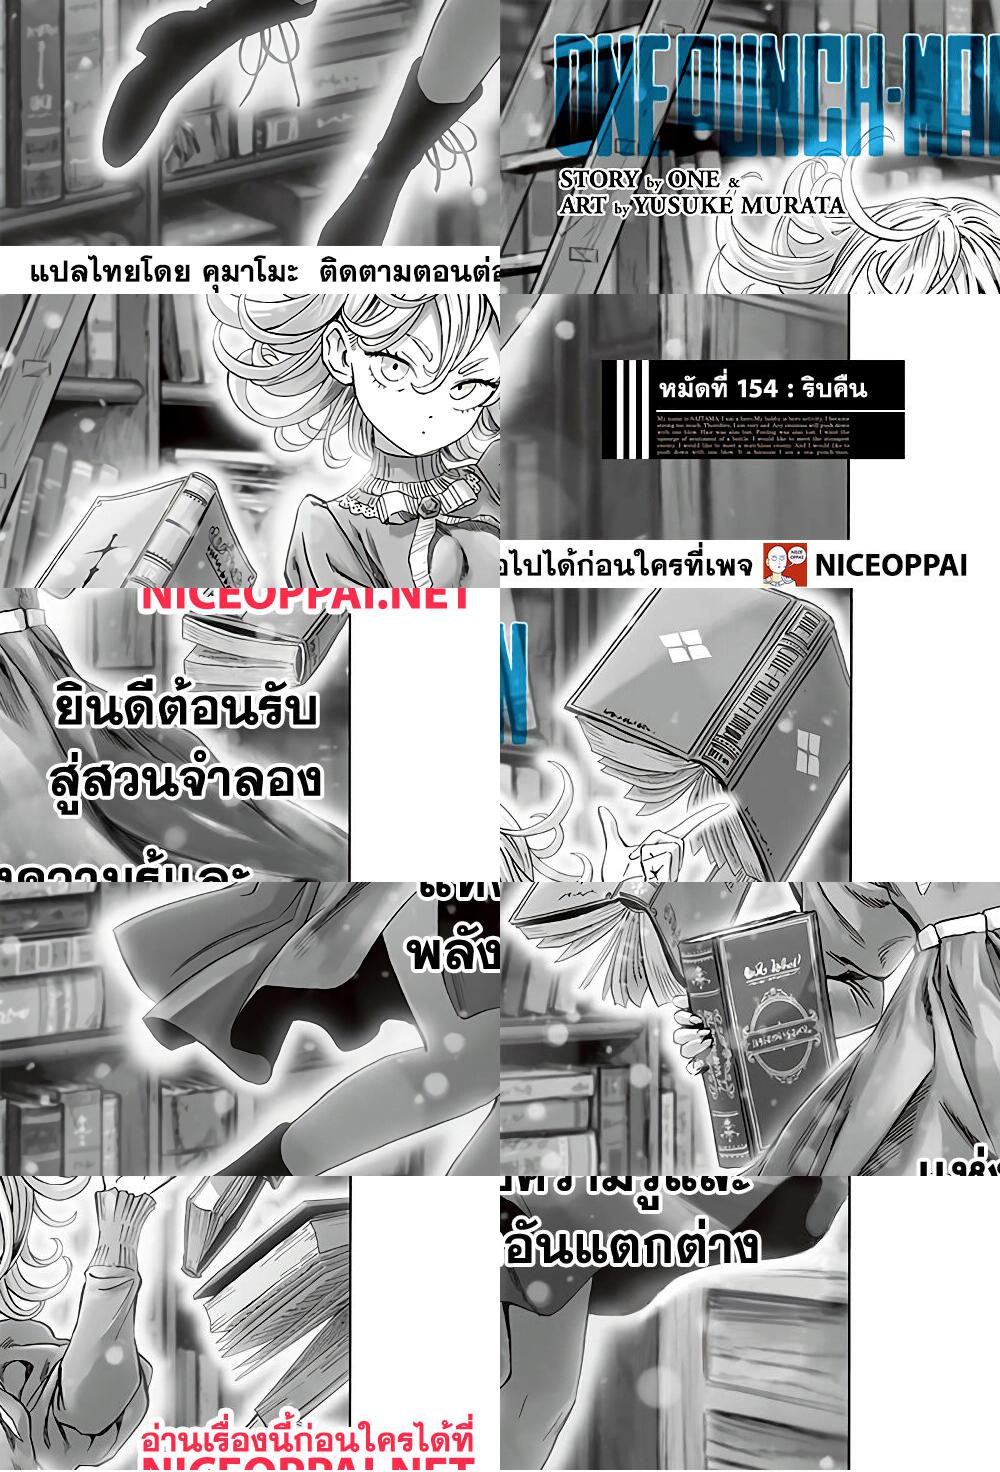 One Punch Man - ริบคืน - 2